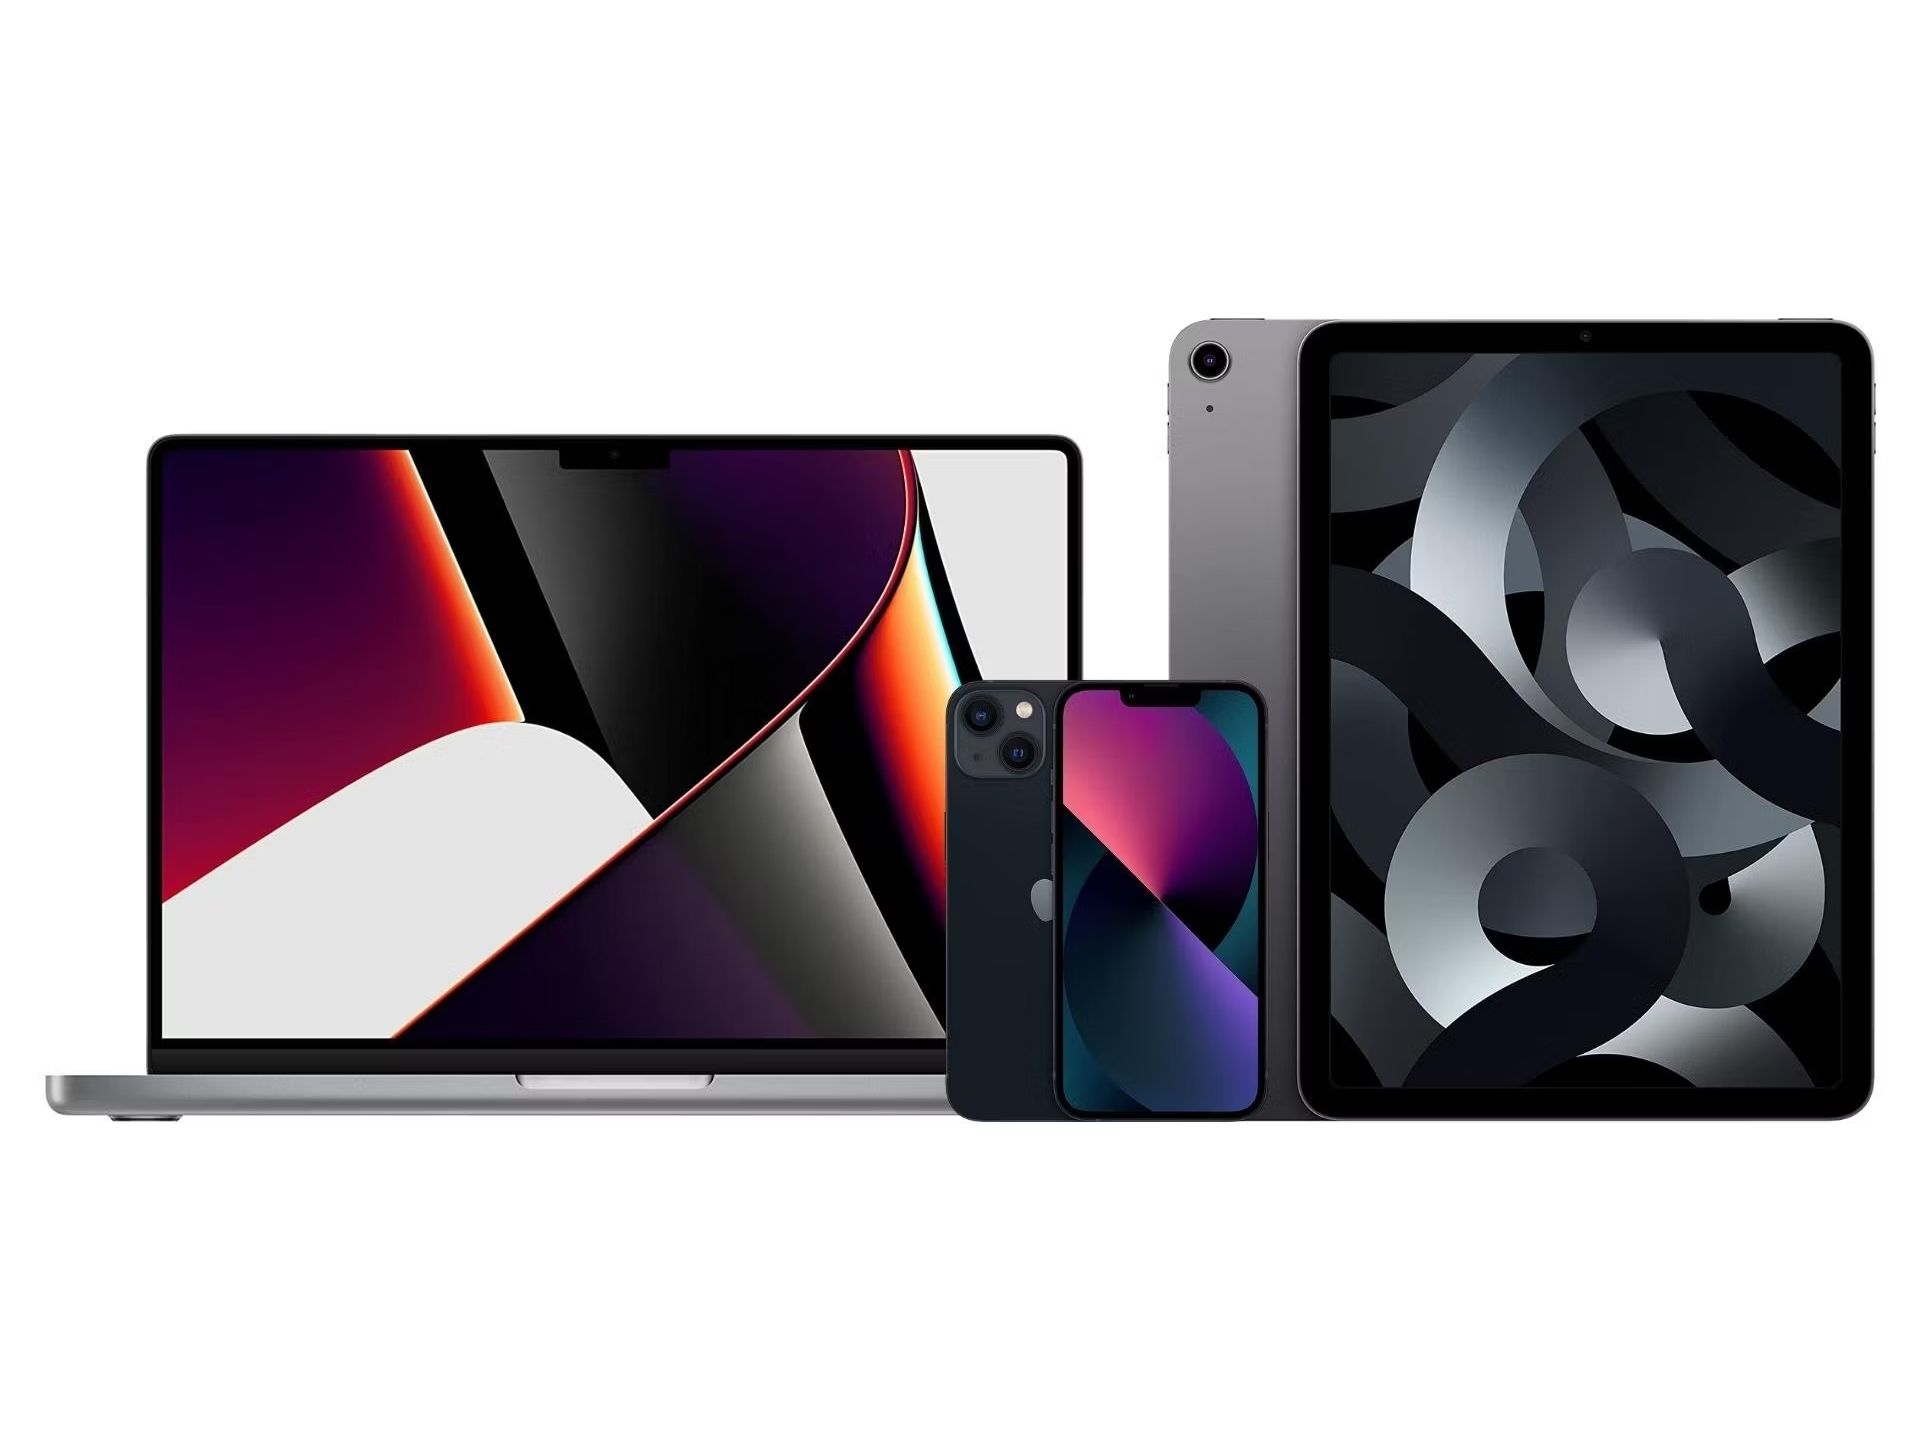 Resized Apple ecosystem devices